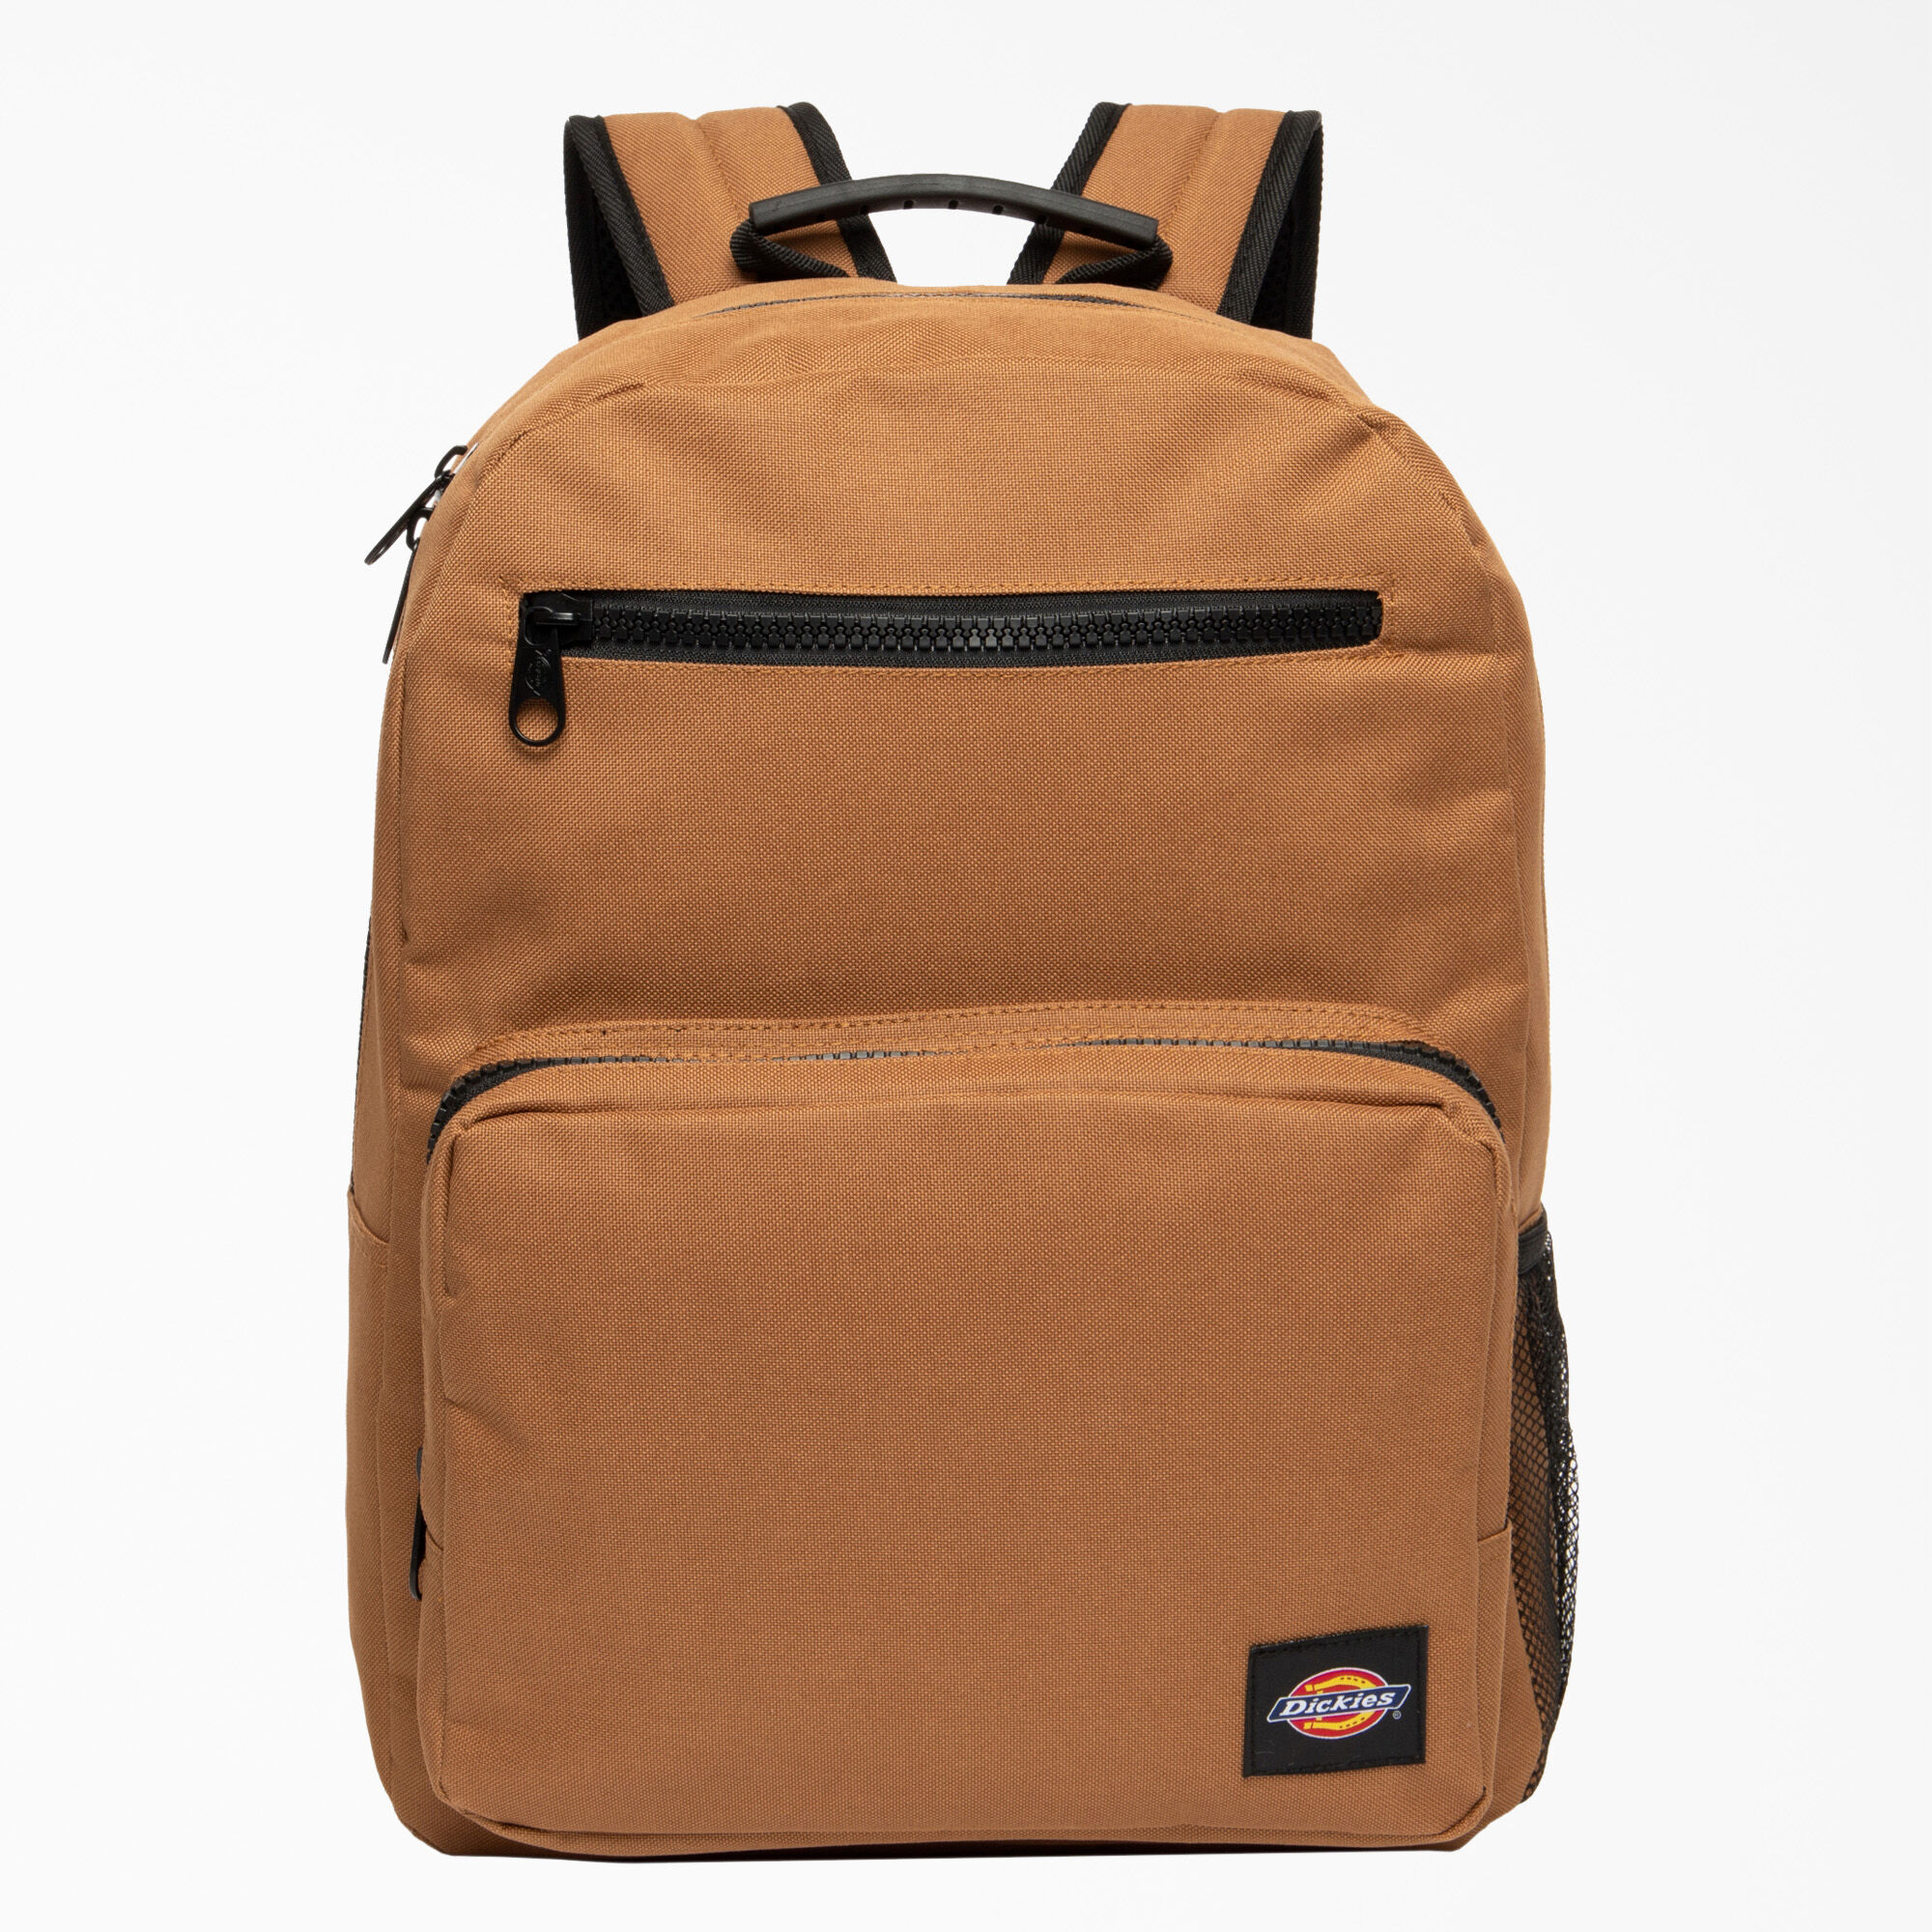 Peck vold offer Commuter Backpack - Dickies US